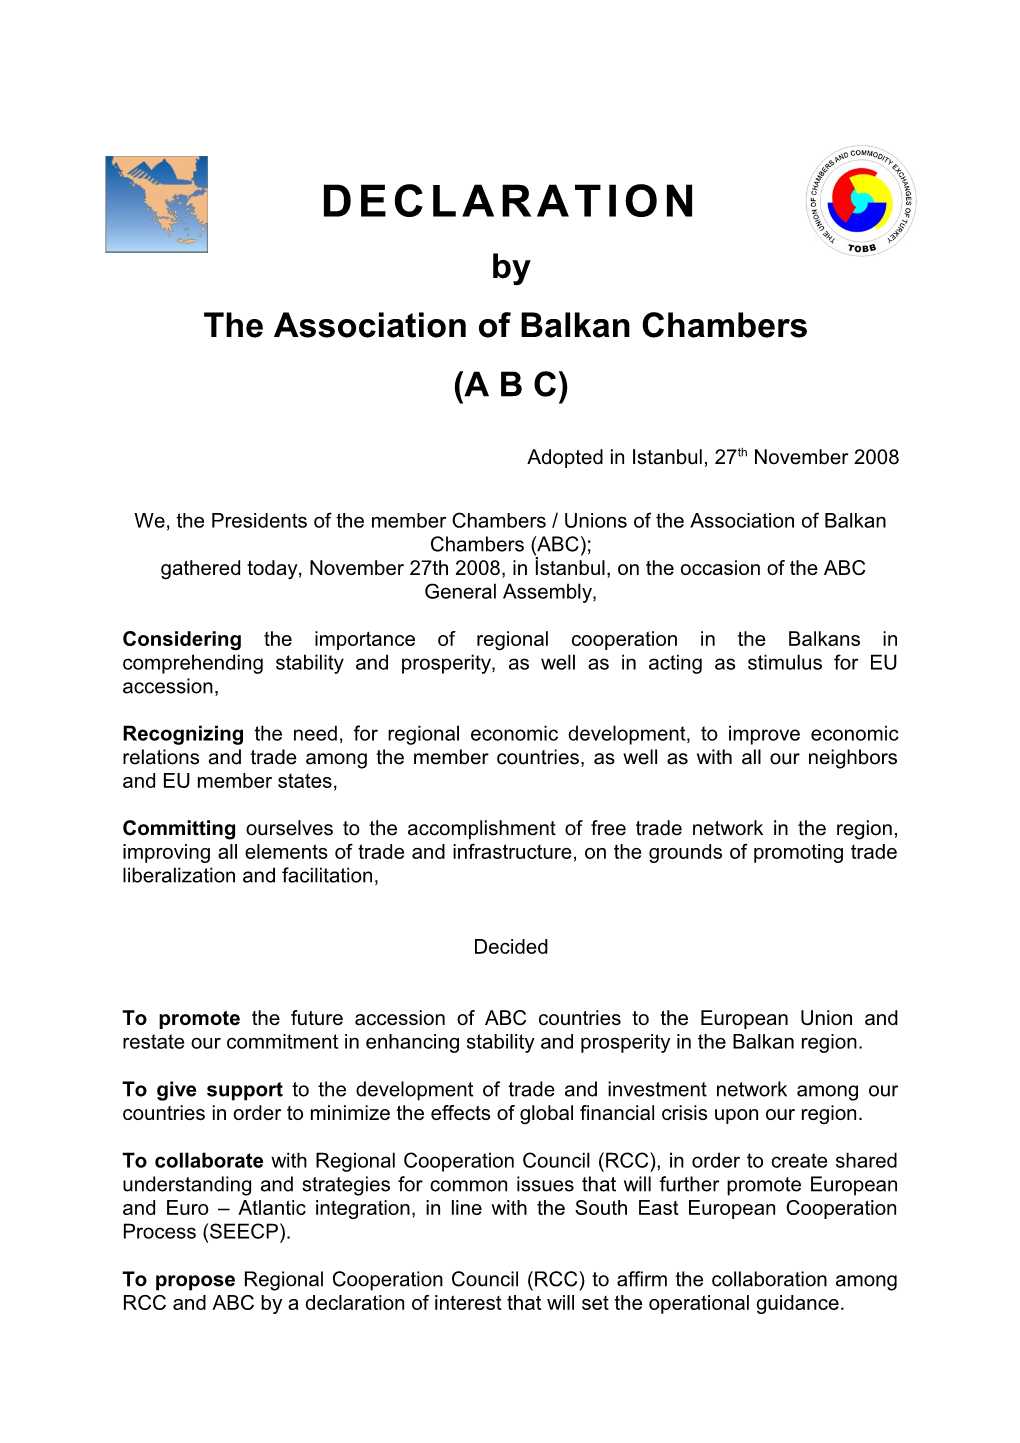 We, the Presidents of the Member Chambers / Unions of the Association of Balkan Chambers (ABC);